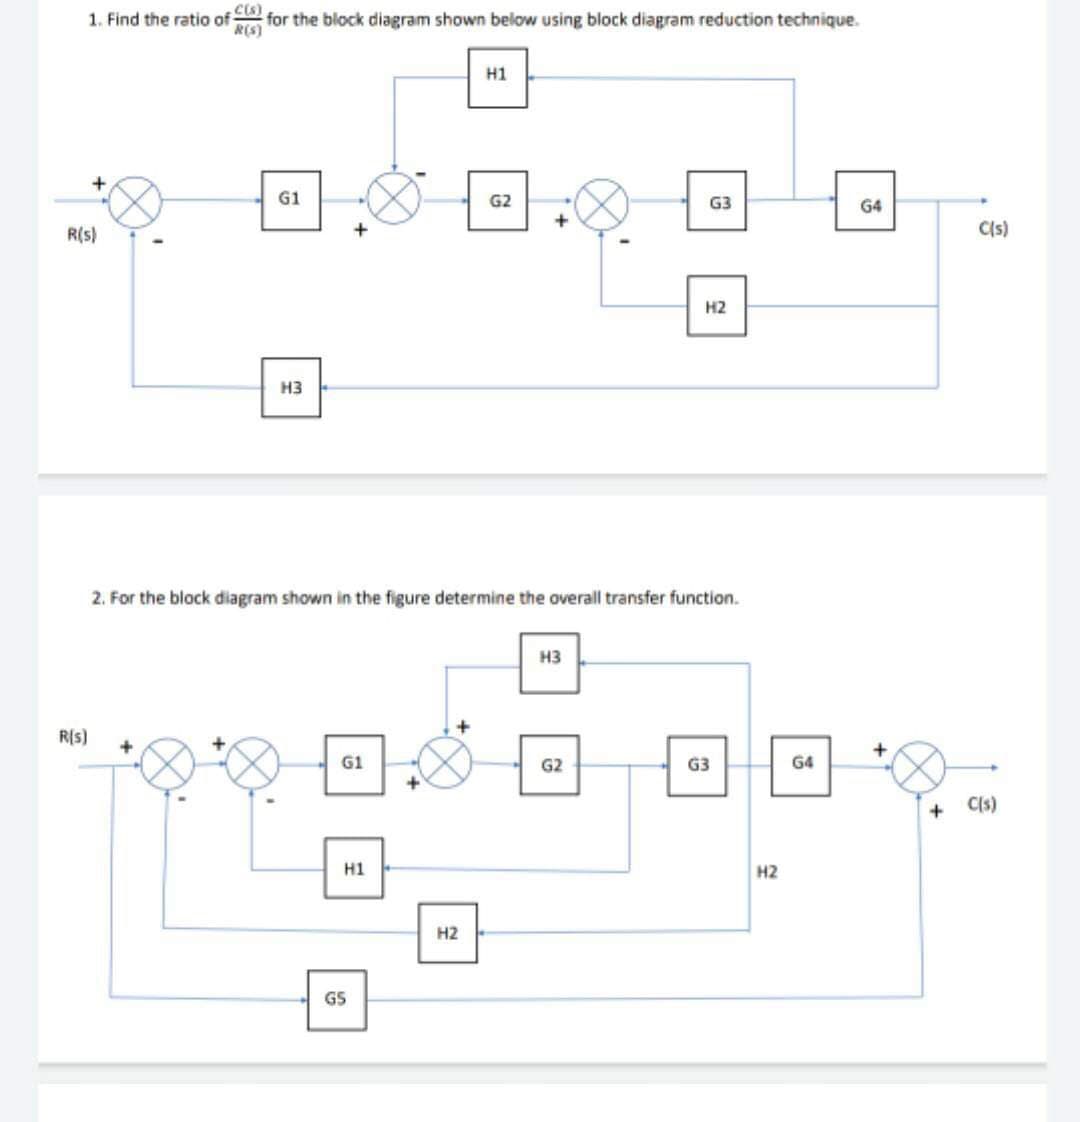 1. Find the ratio of
+
R(S)
R(S)
C(s)
for the block diagram shown below using block diagram reduction technique.
R(S)
+
G1
H3
+
G1
H1
GS
H1
2. For the block diagram shown in the figure determine the overall transfer function.
H2
G2
+
H3
G3
G2
H2
G3
H2
64
G4
+
C(s)
C(s)